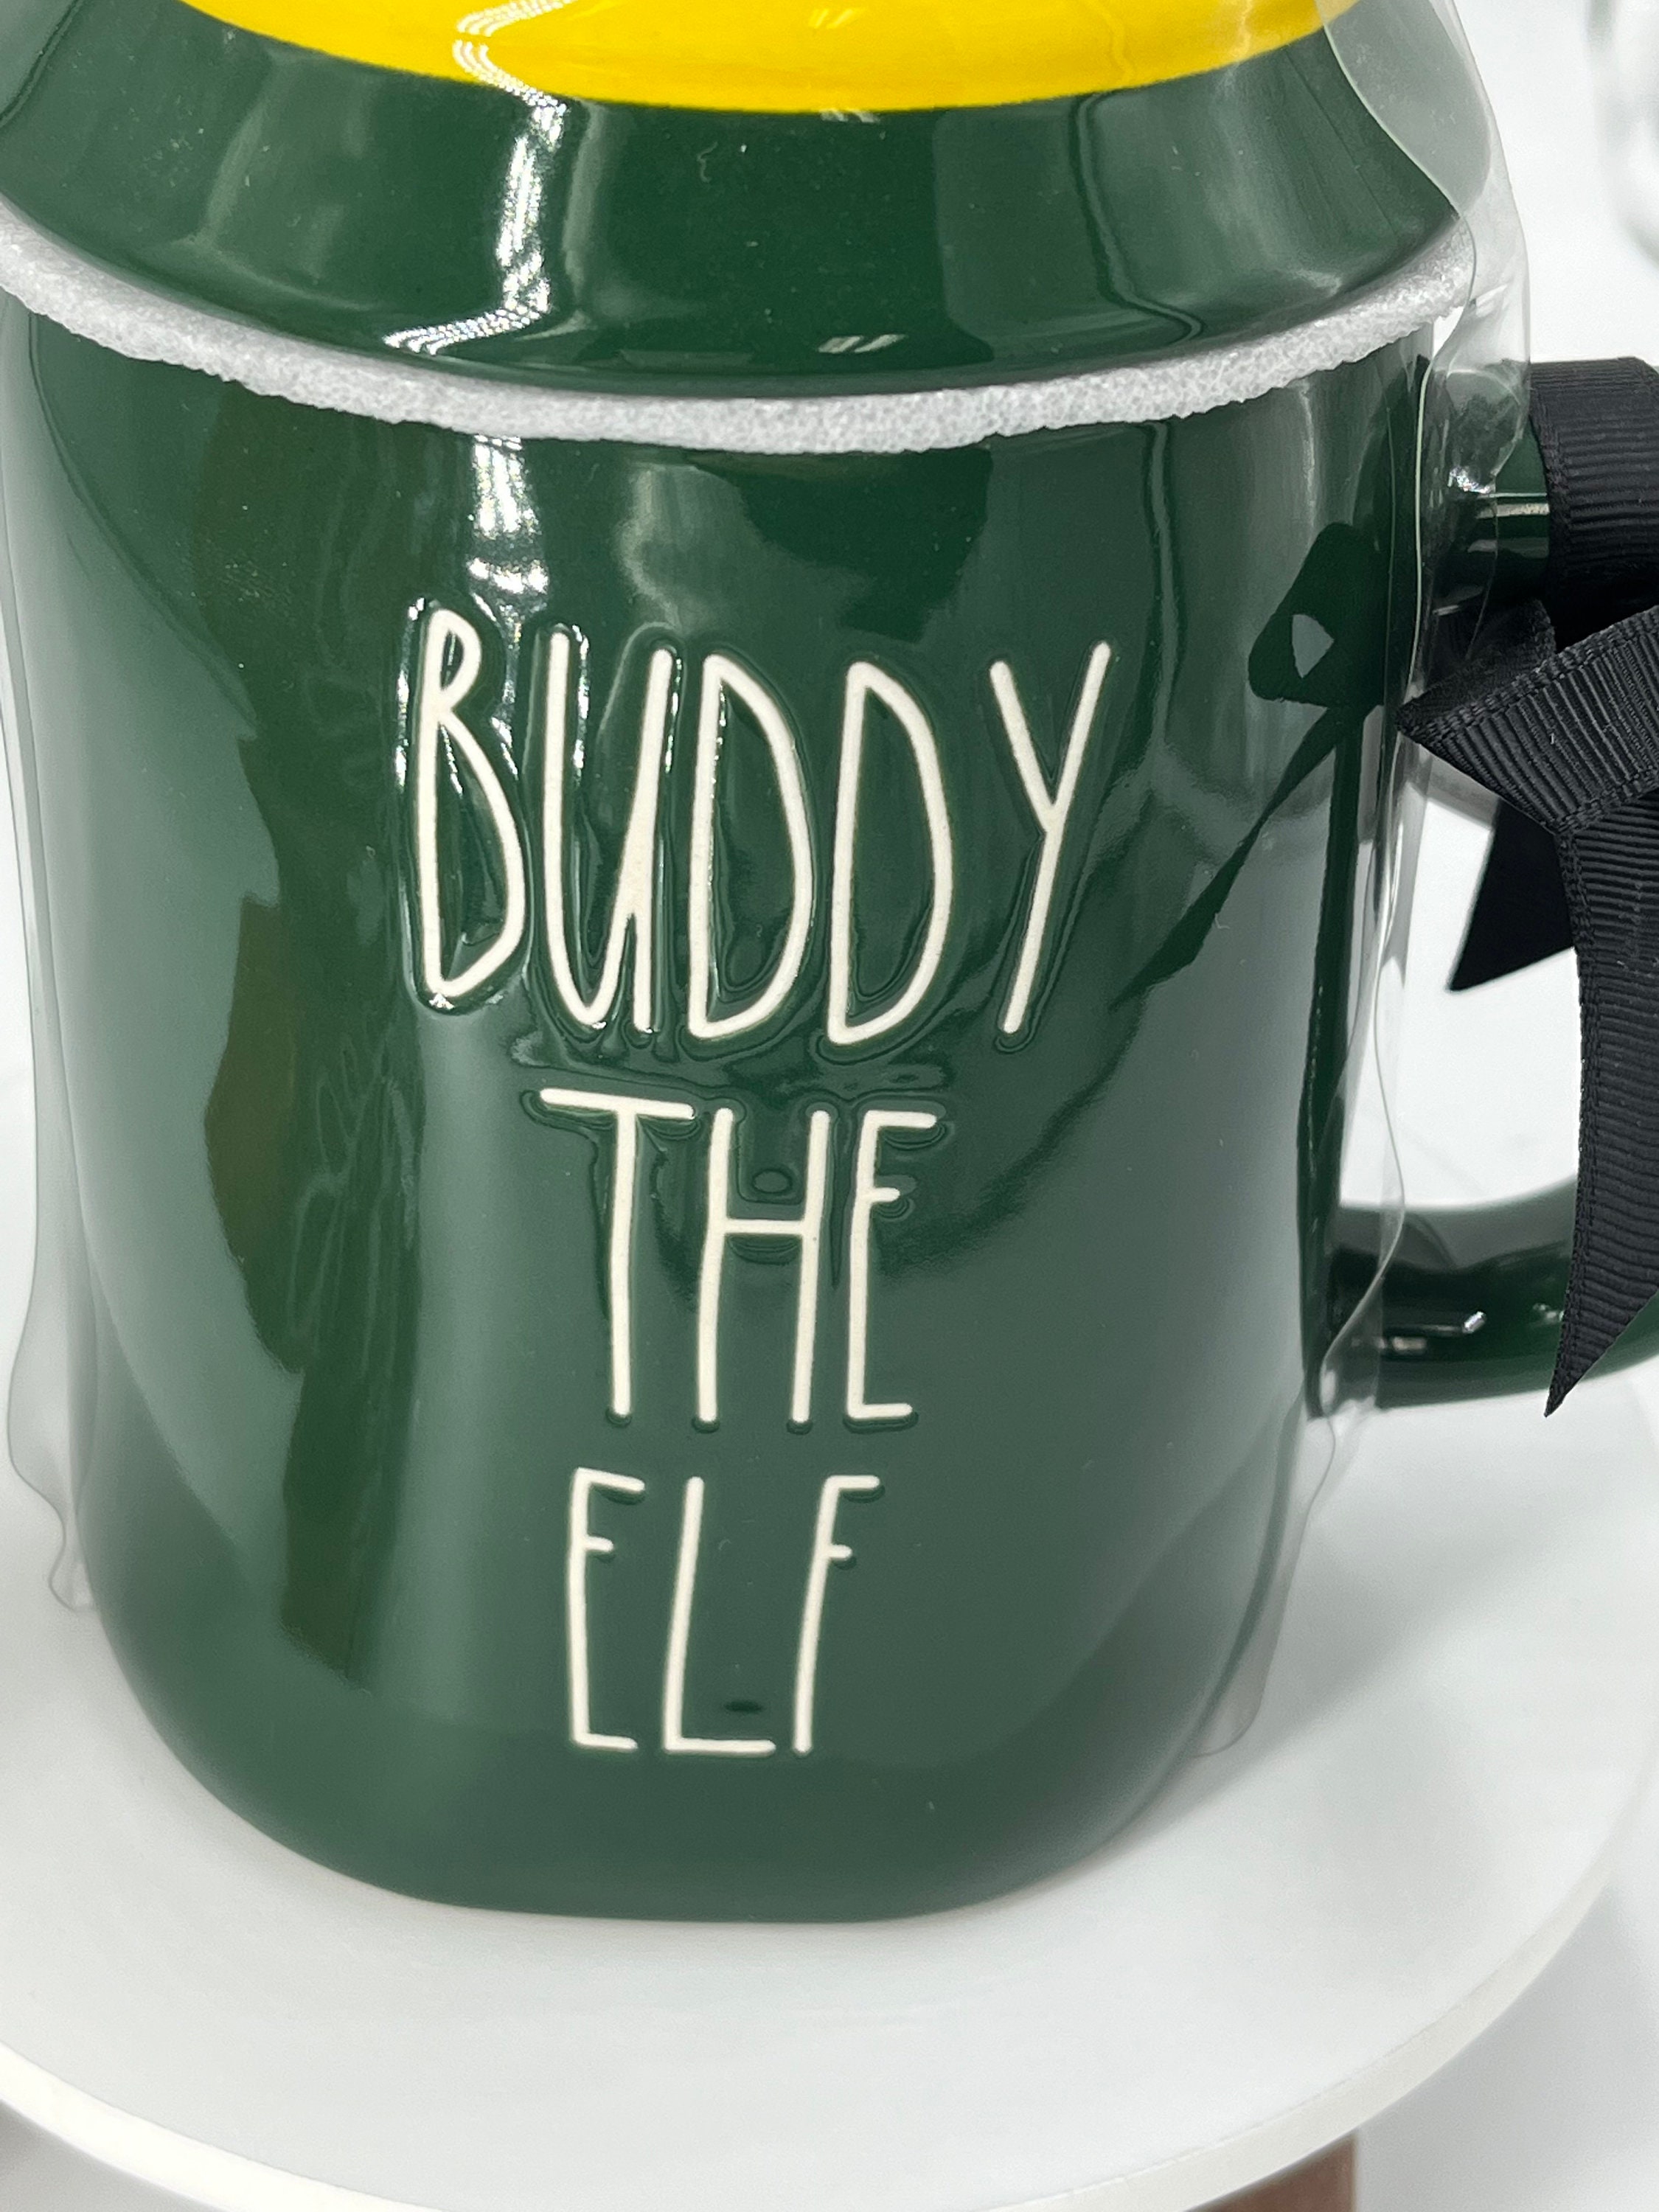 Buddy The Elf, What's Your Favorite Color? Coffee Mug by Graphic